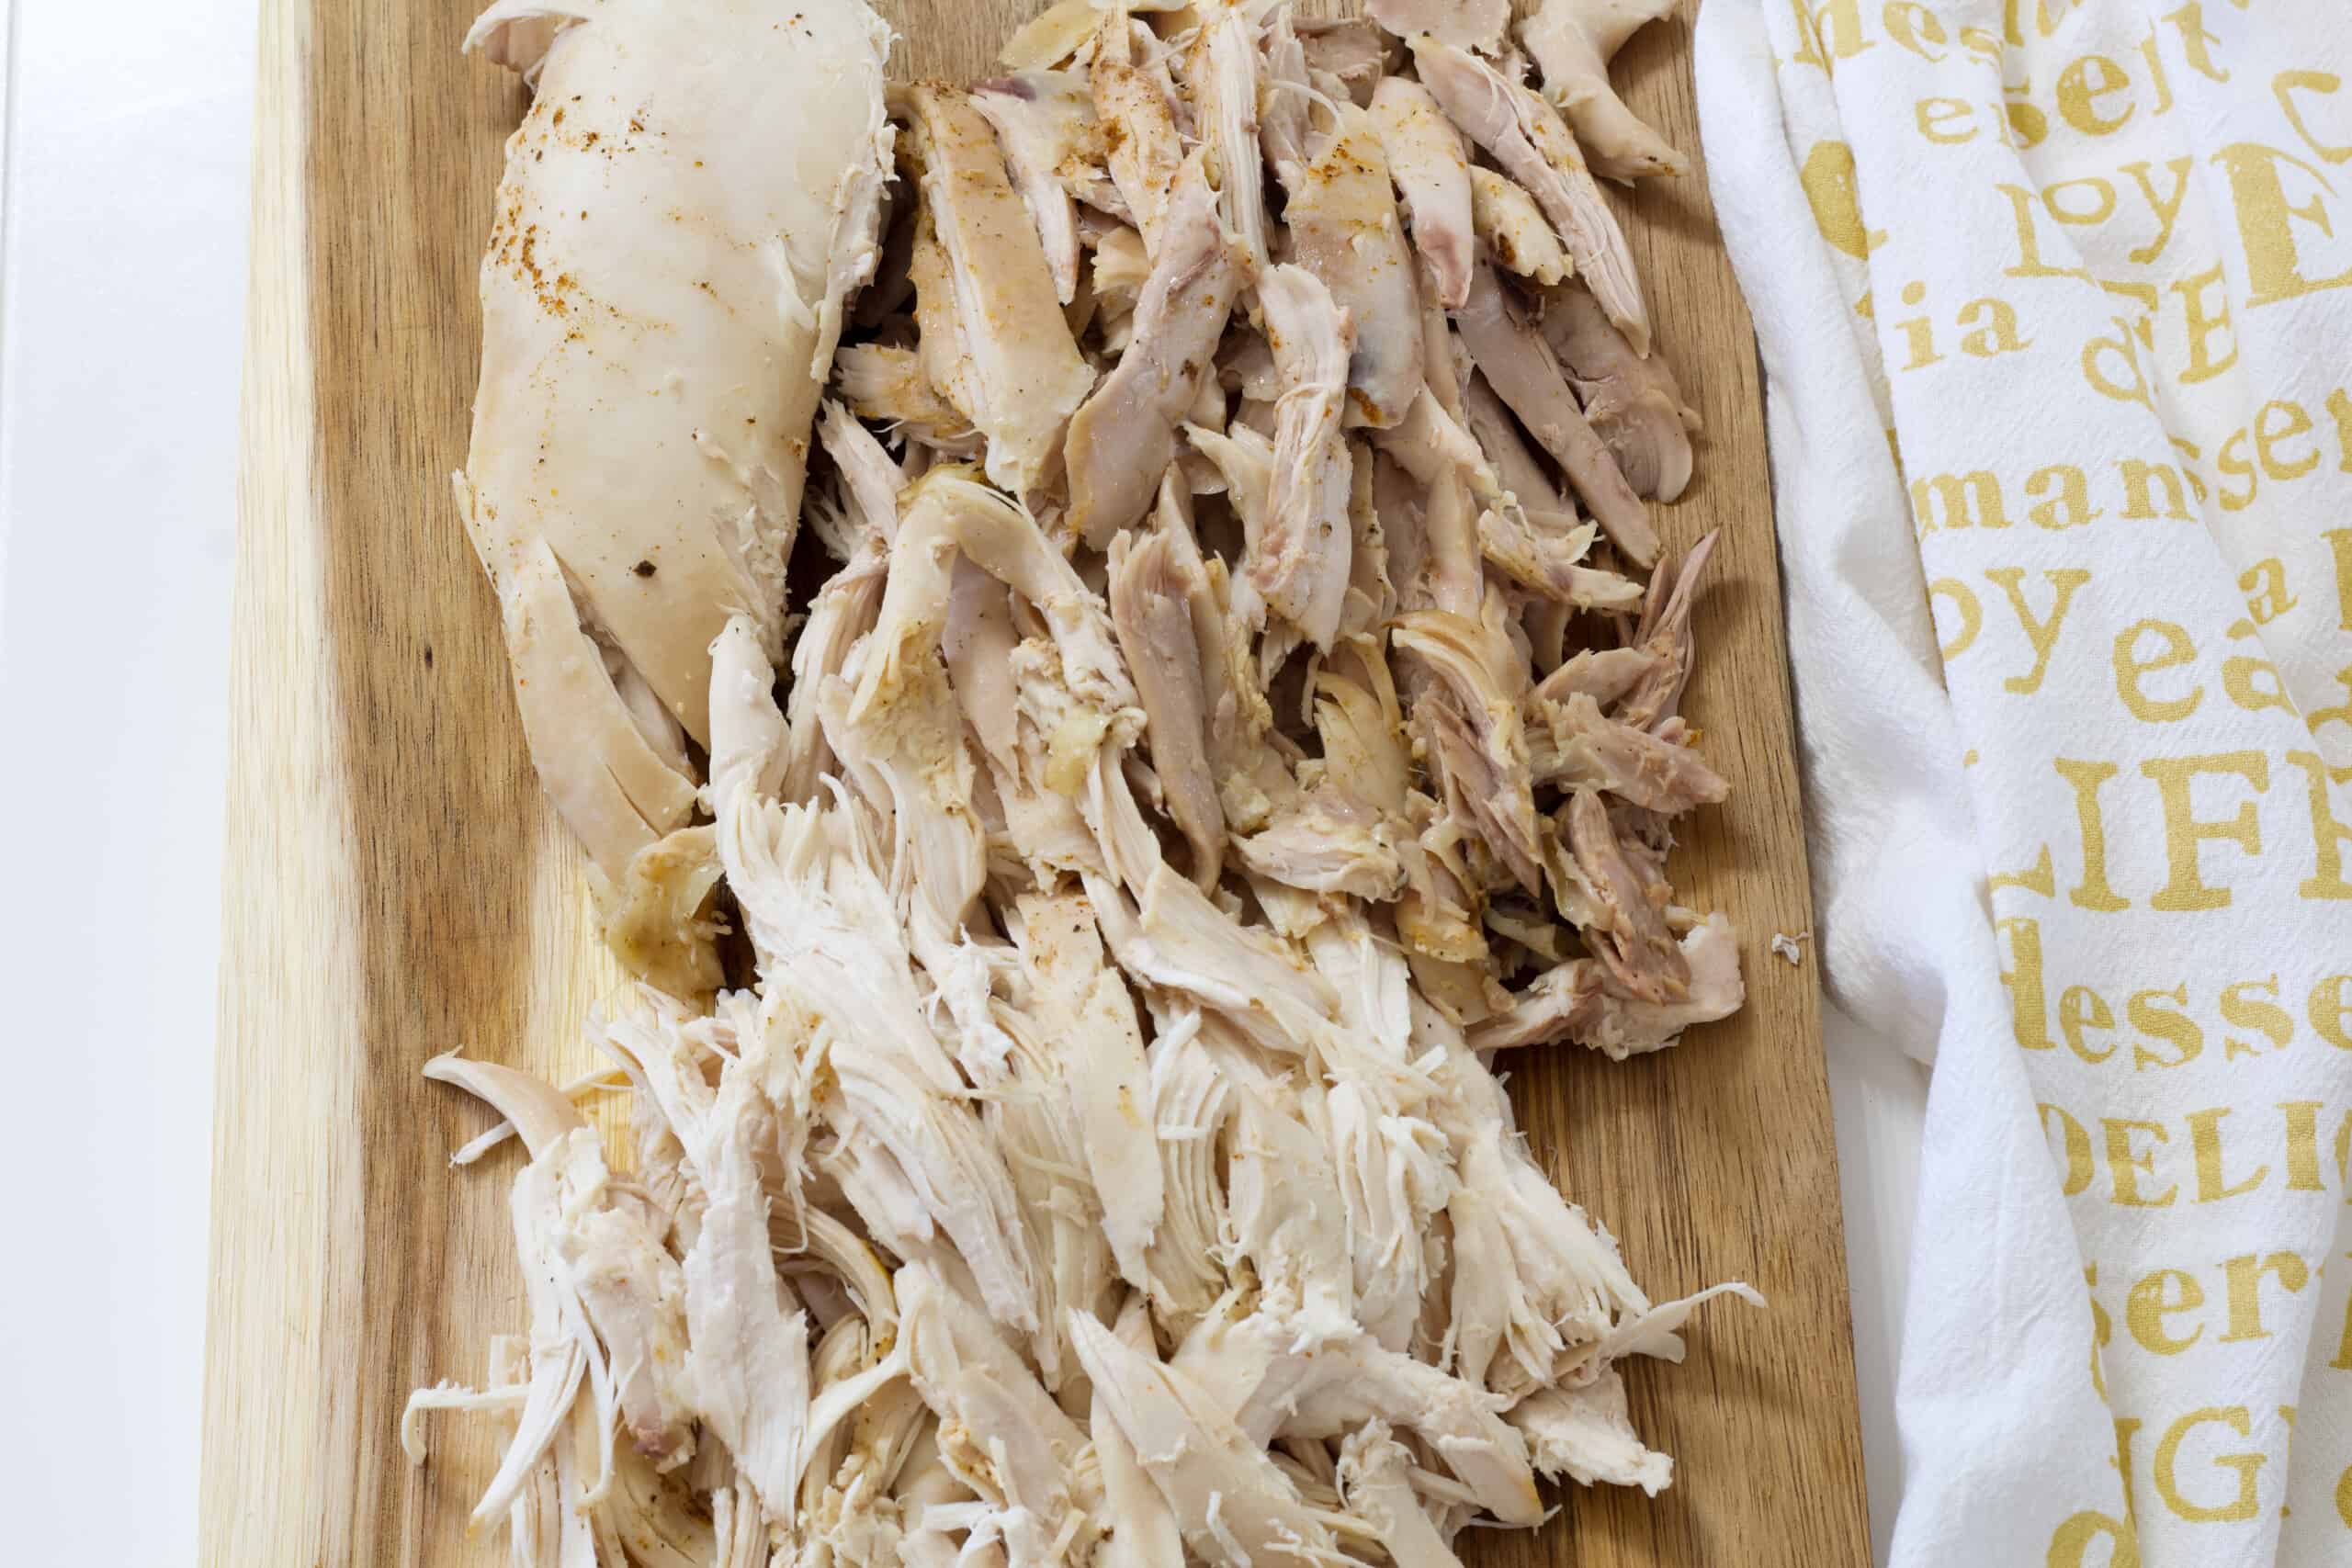 Shredded chicken laying on a wooden cutting board with a tea towel laying next to it.